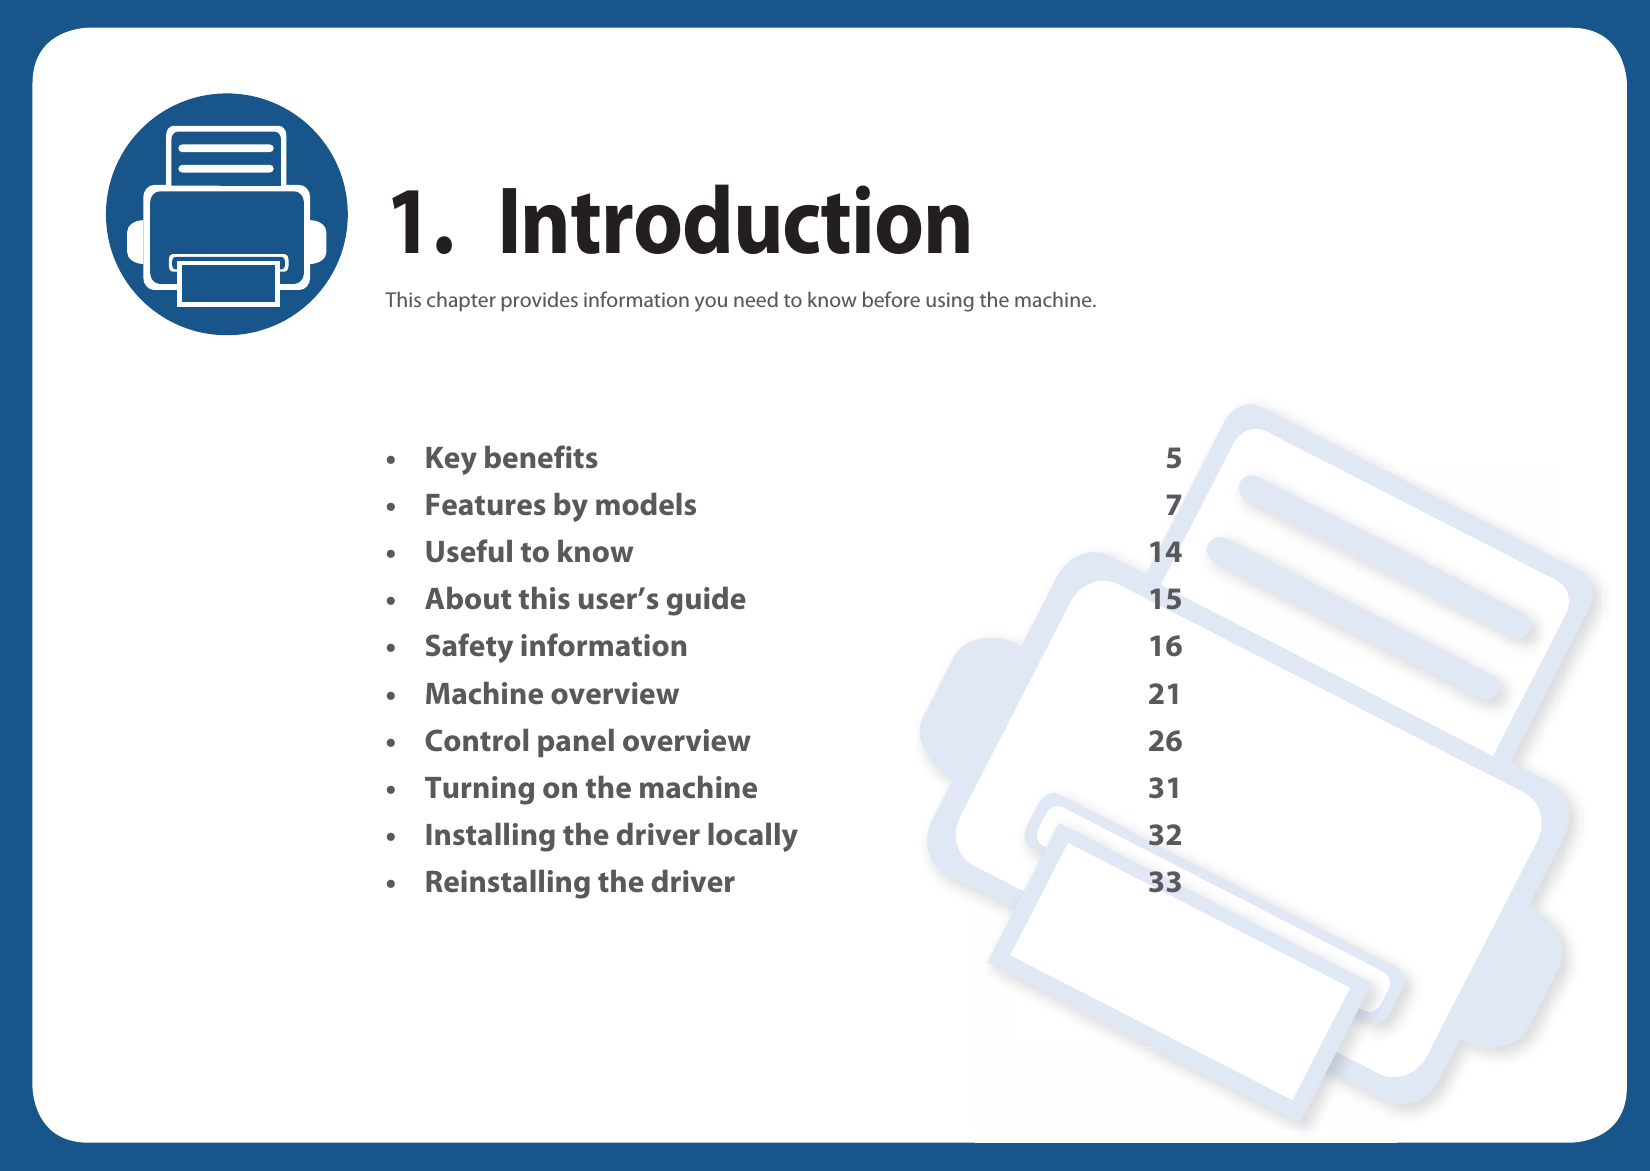 1. IntroductionThis chapter provides information you need to know before using the machine.• Key benefits 5• Features by models 7• Useful to know 14• About this user’s guide 15• Safety information 16• Machine overview 21• Control panel overview 26• Turning on the machine 31• Installing the driver locally 32• Reinstalling the driver 33